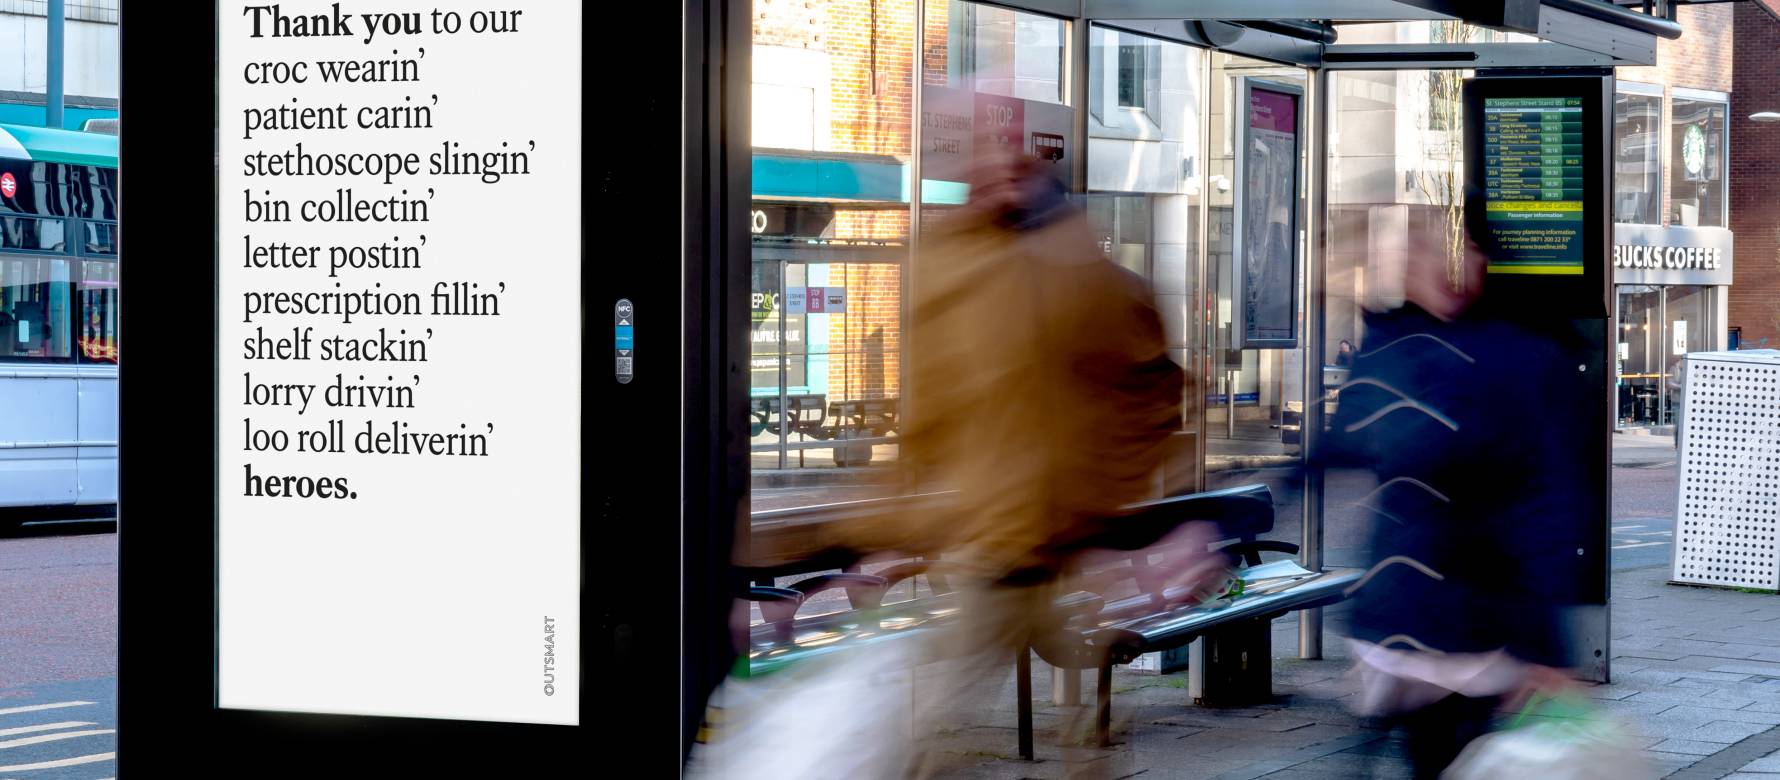 Adshel live screen on bus stop showing Outsmart advert